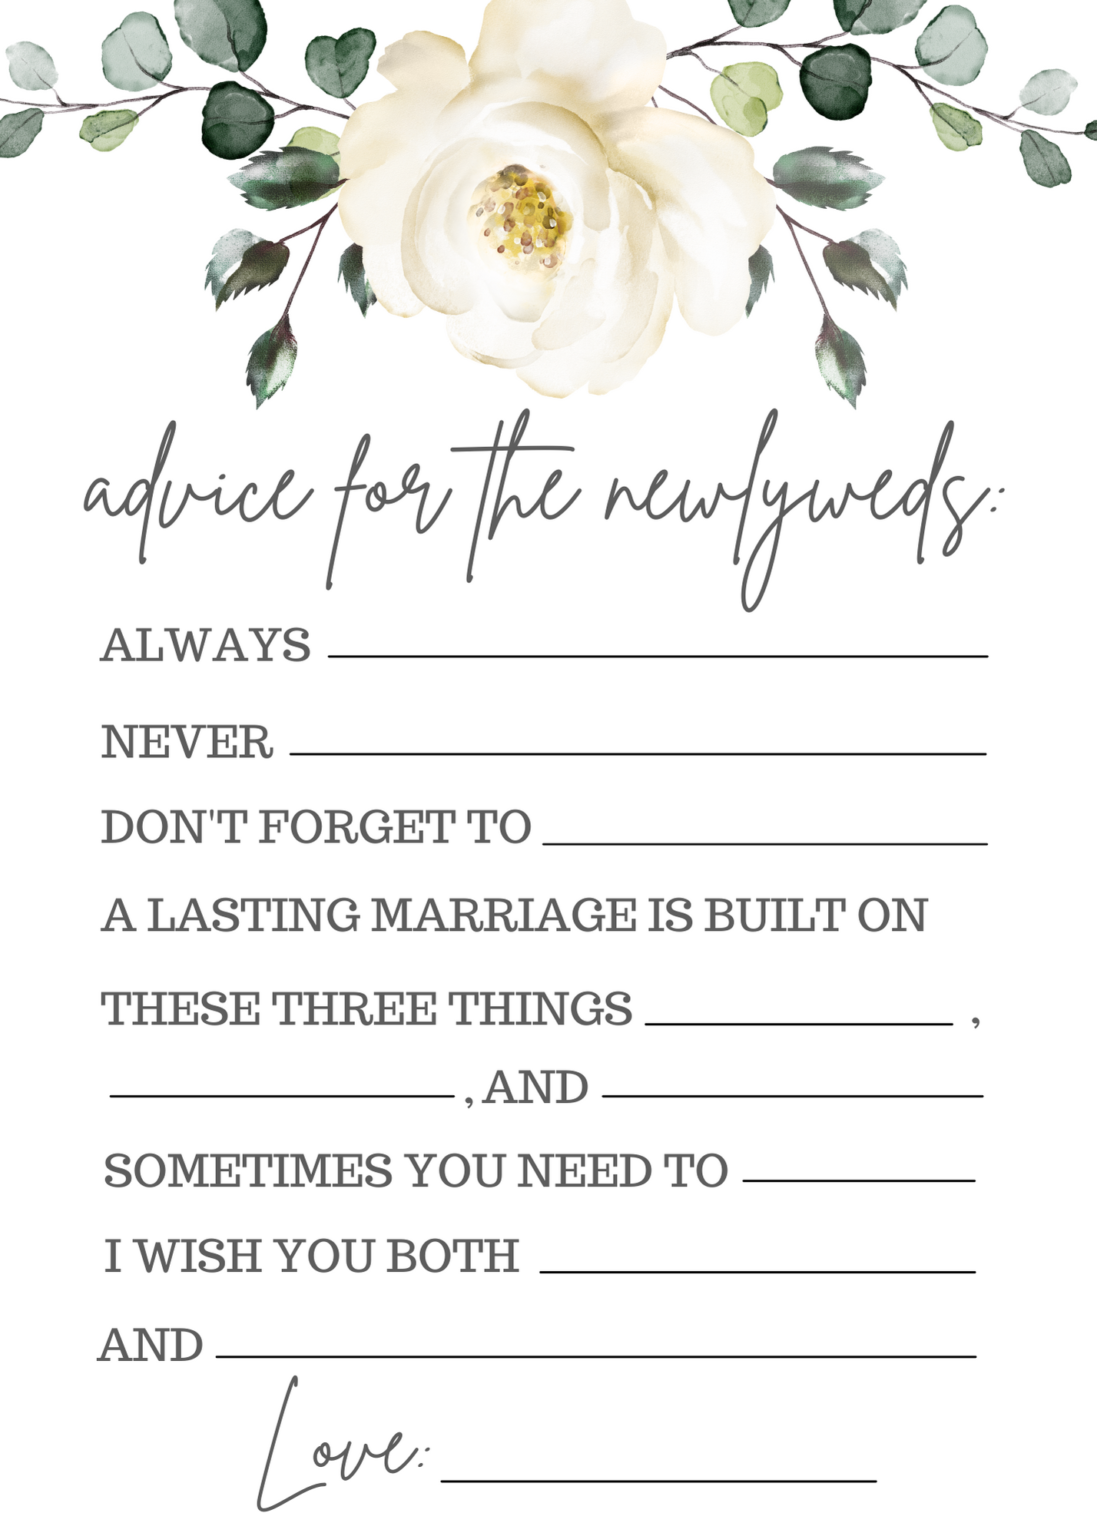 bridal-shower-advice-cards-template